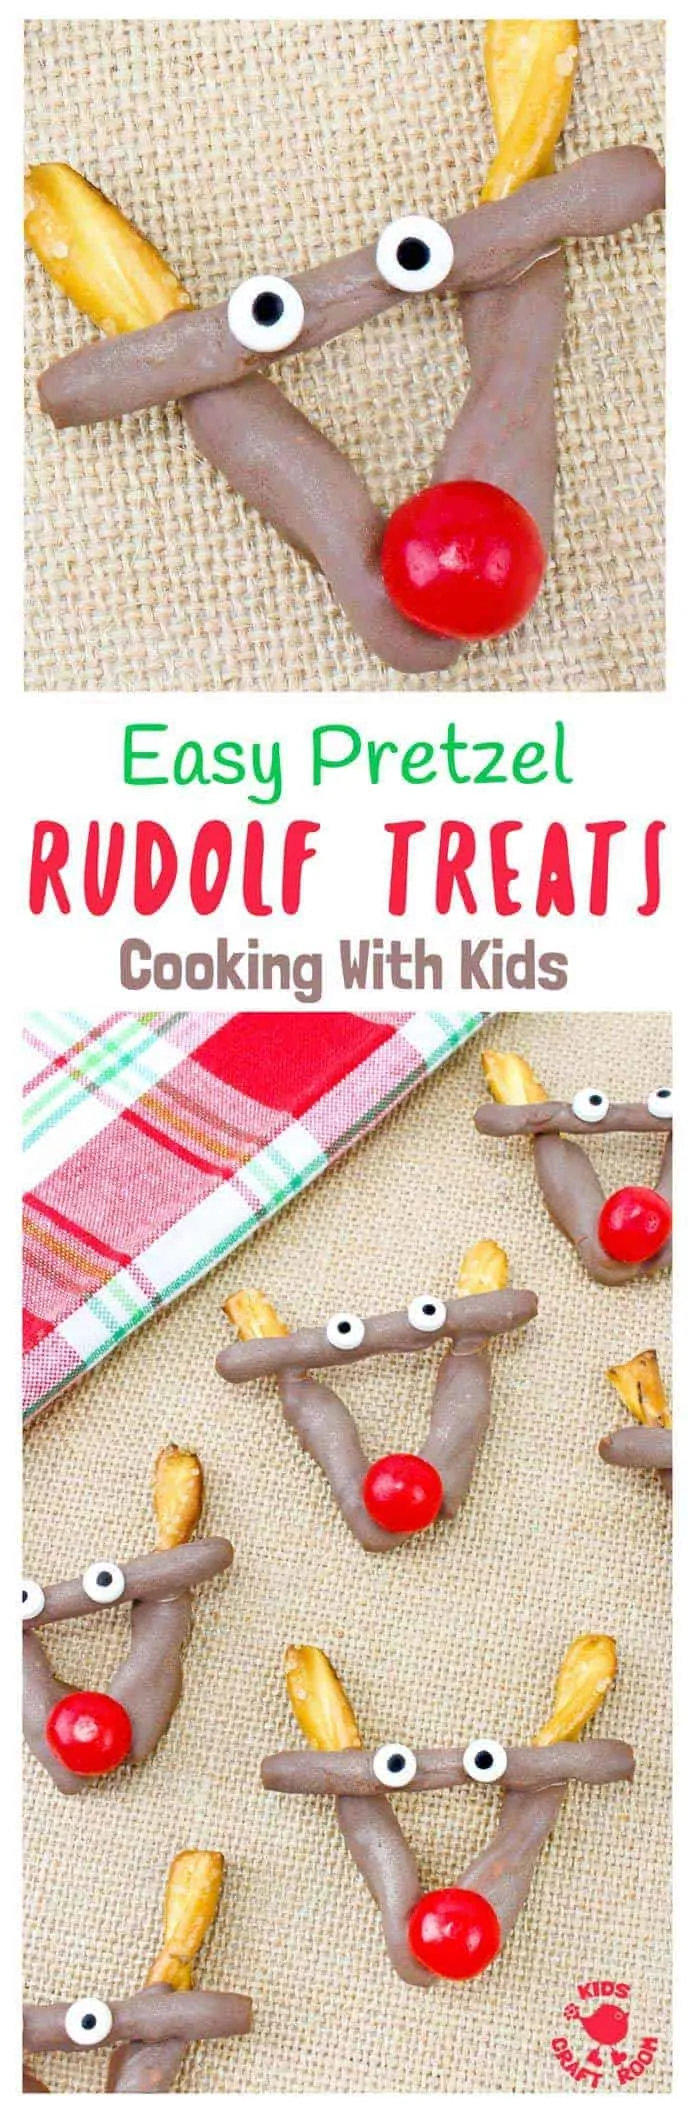 EASY PRETZEL REINDEER TREATS - Simple chocolate pretzel christmas treats melt hearts and tickle taste buds every time!  A festive Christmas recipe for cooking with kids. Great for Christmas parties and bake sales, play dates or to share with classmates and teachers for an end of term festive treat. Who can resist the charms of Rudolf The Red Nosed Reindeer? I know we can't! 